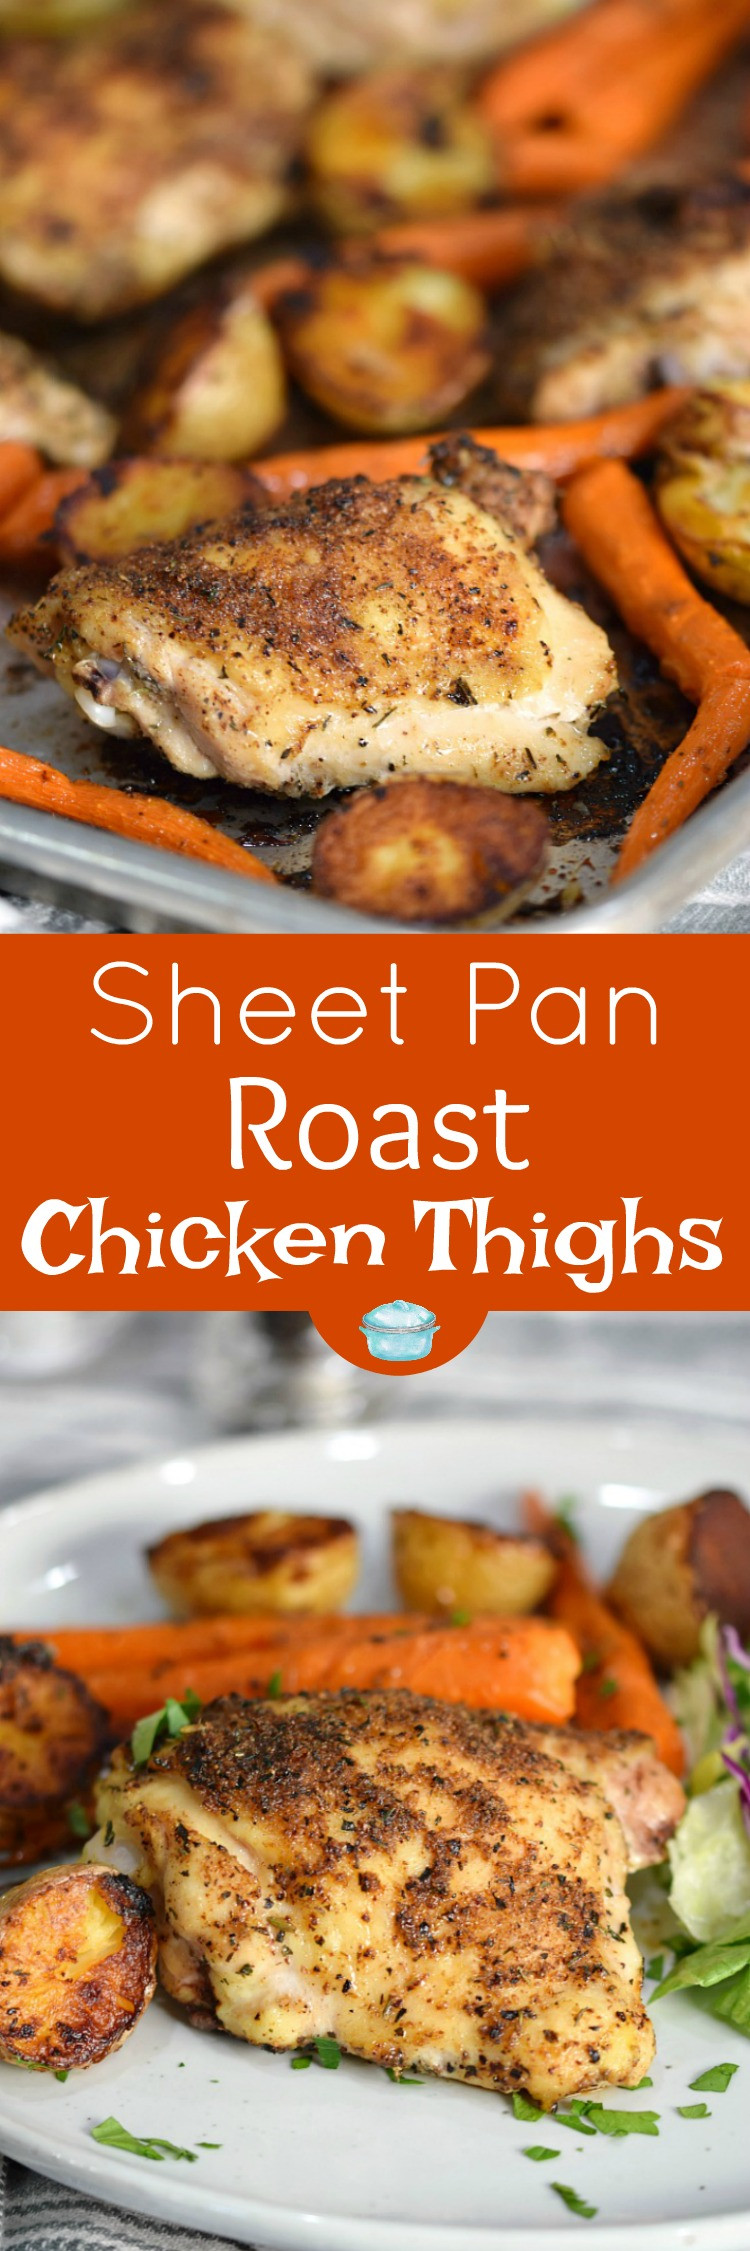 Sheet Pan Chicken Thighs And Potatoes
 Sheet Pan Roast Chicken Thighs Cooking With Curls